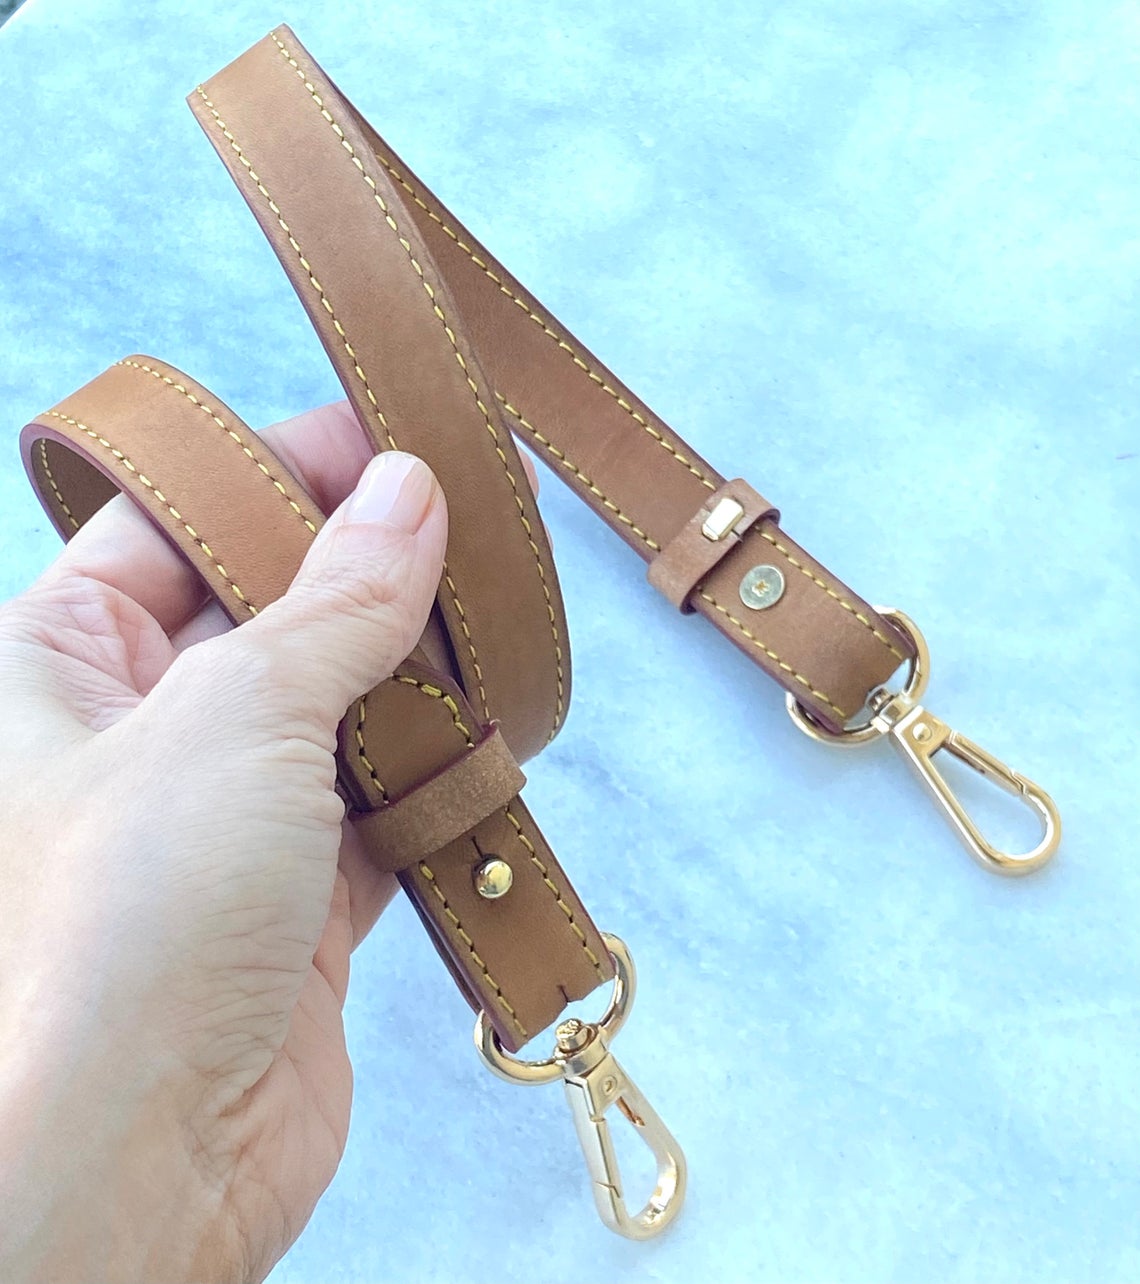 Handcrafted Vachetta Leather Shoulder Strap Replacement - Natural Vachetta Leather or Honey Vintage Tanning Handmade Patina - 27" Strap - Sexy Little Vintage